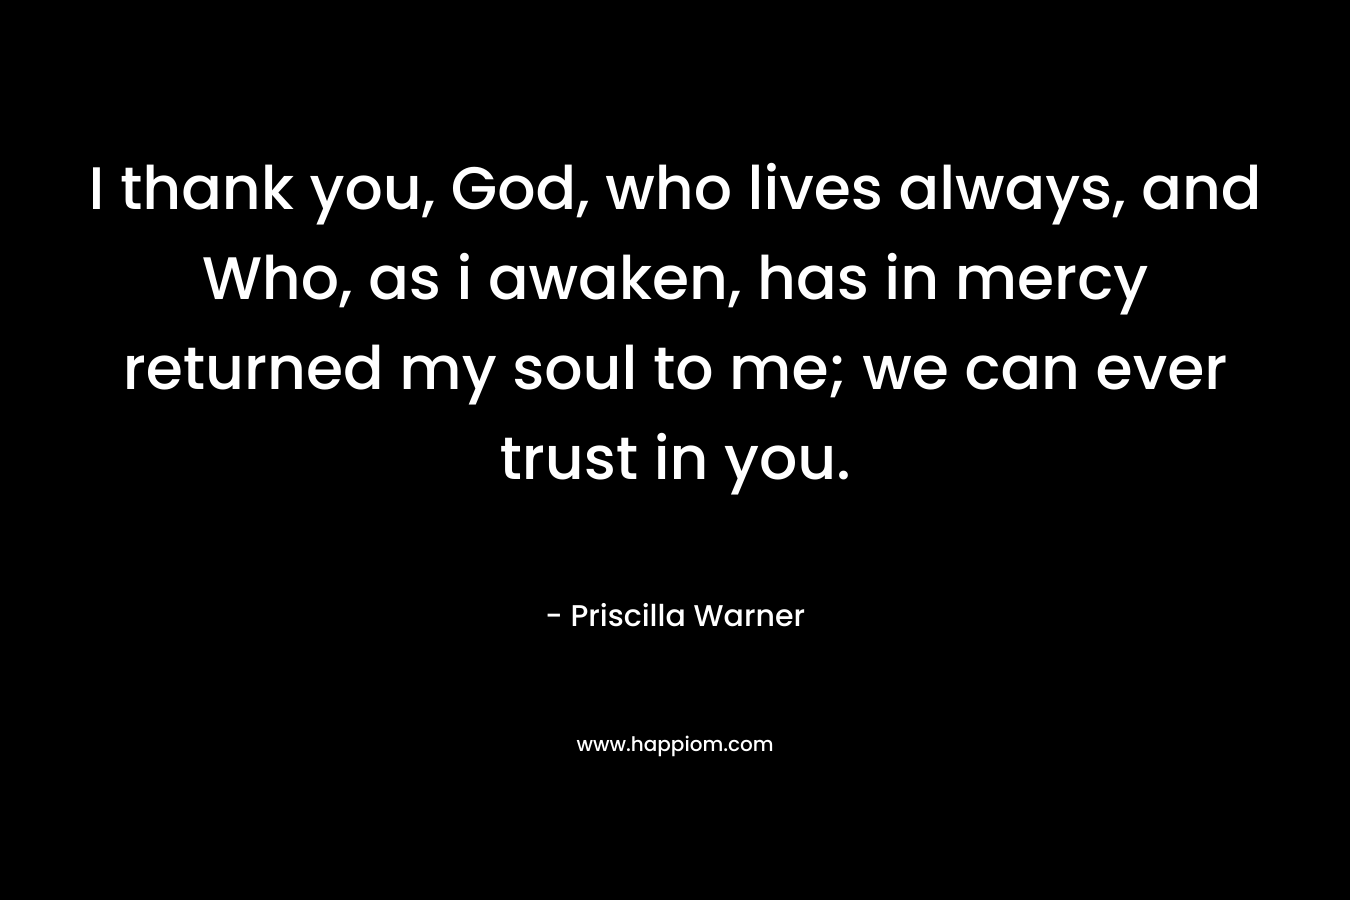 I thank you, God, who lives always, and Who, as i awaken, has in mercy returned my soul to me; we can ever trust in you.